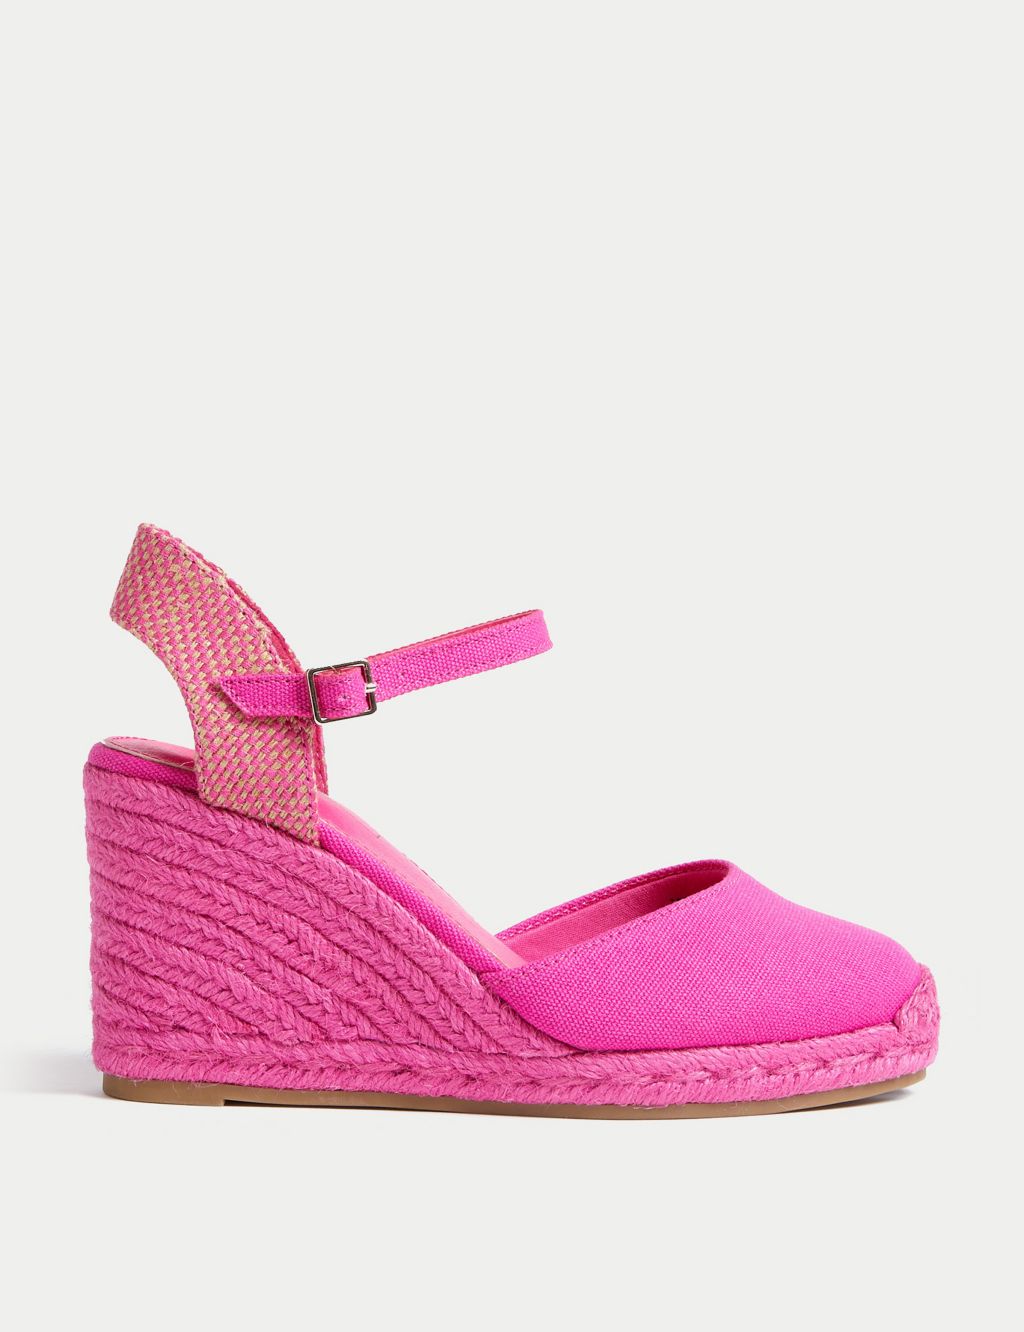 Buckle Ankle Strap Wedge Espadrilles image 1